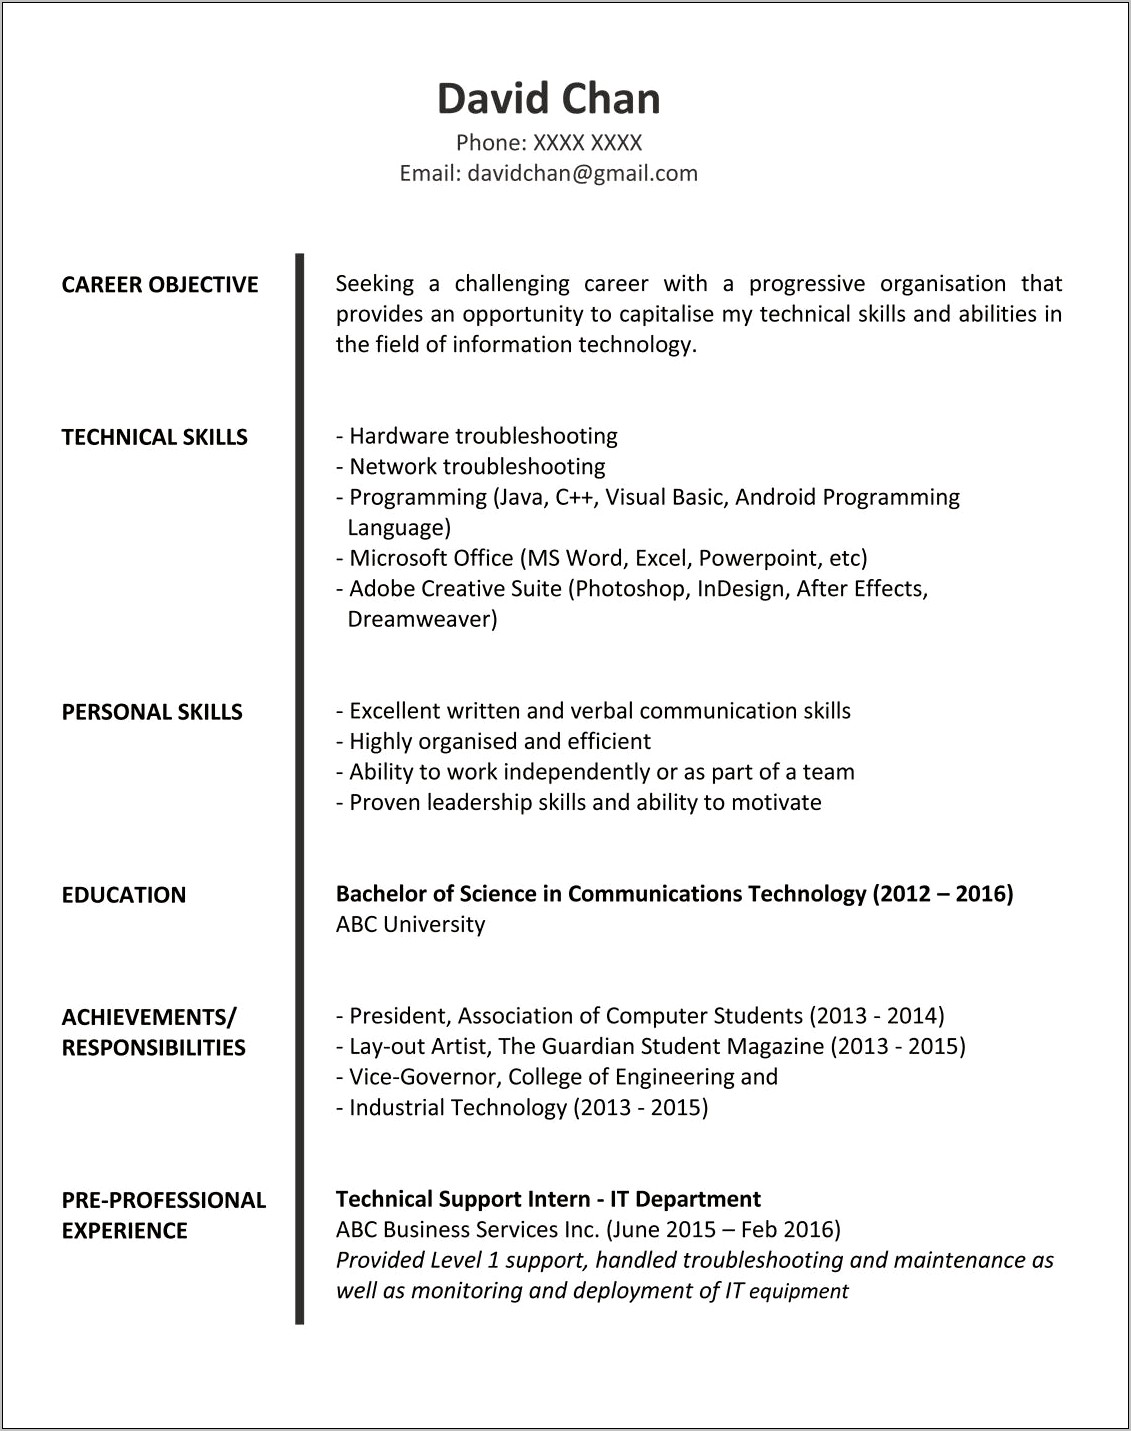 Resume Format For Fresh Graduates With No Experience